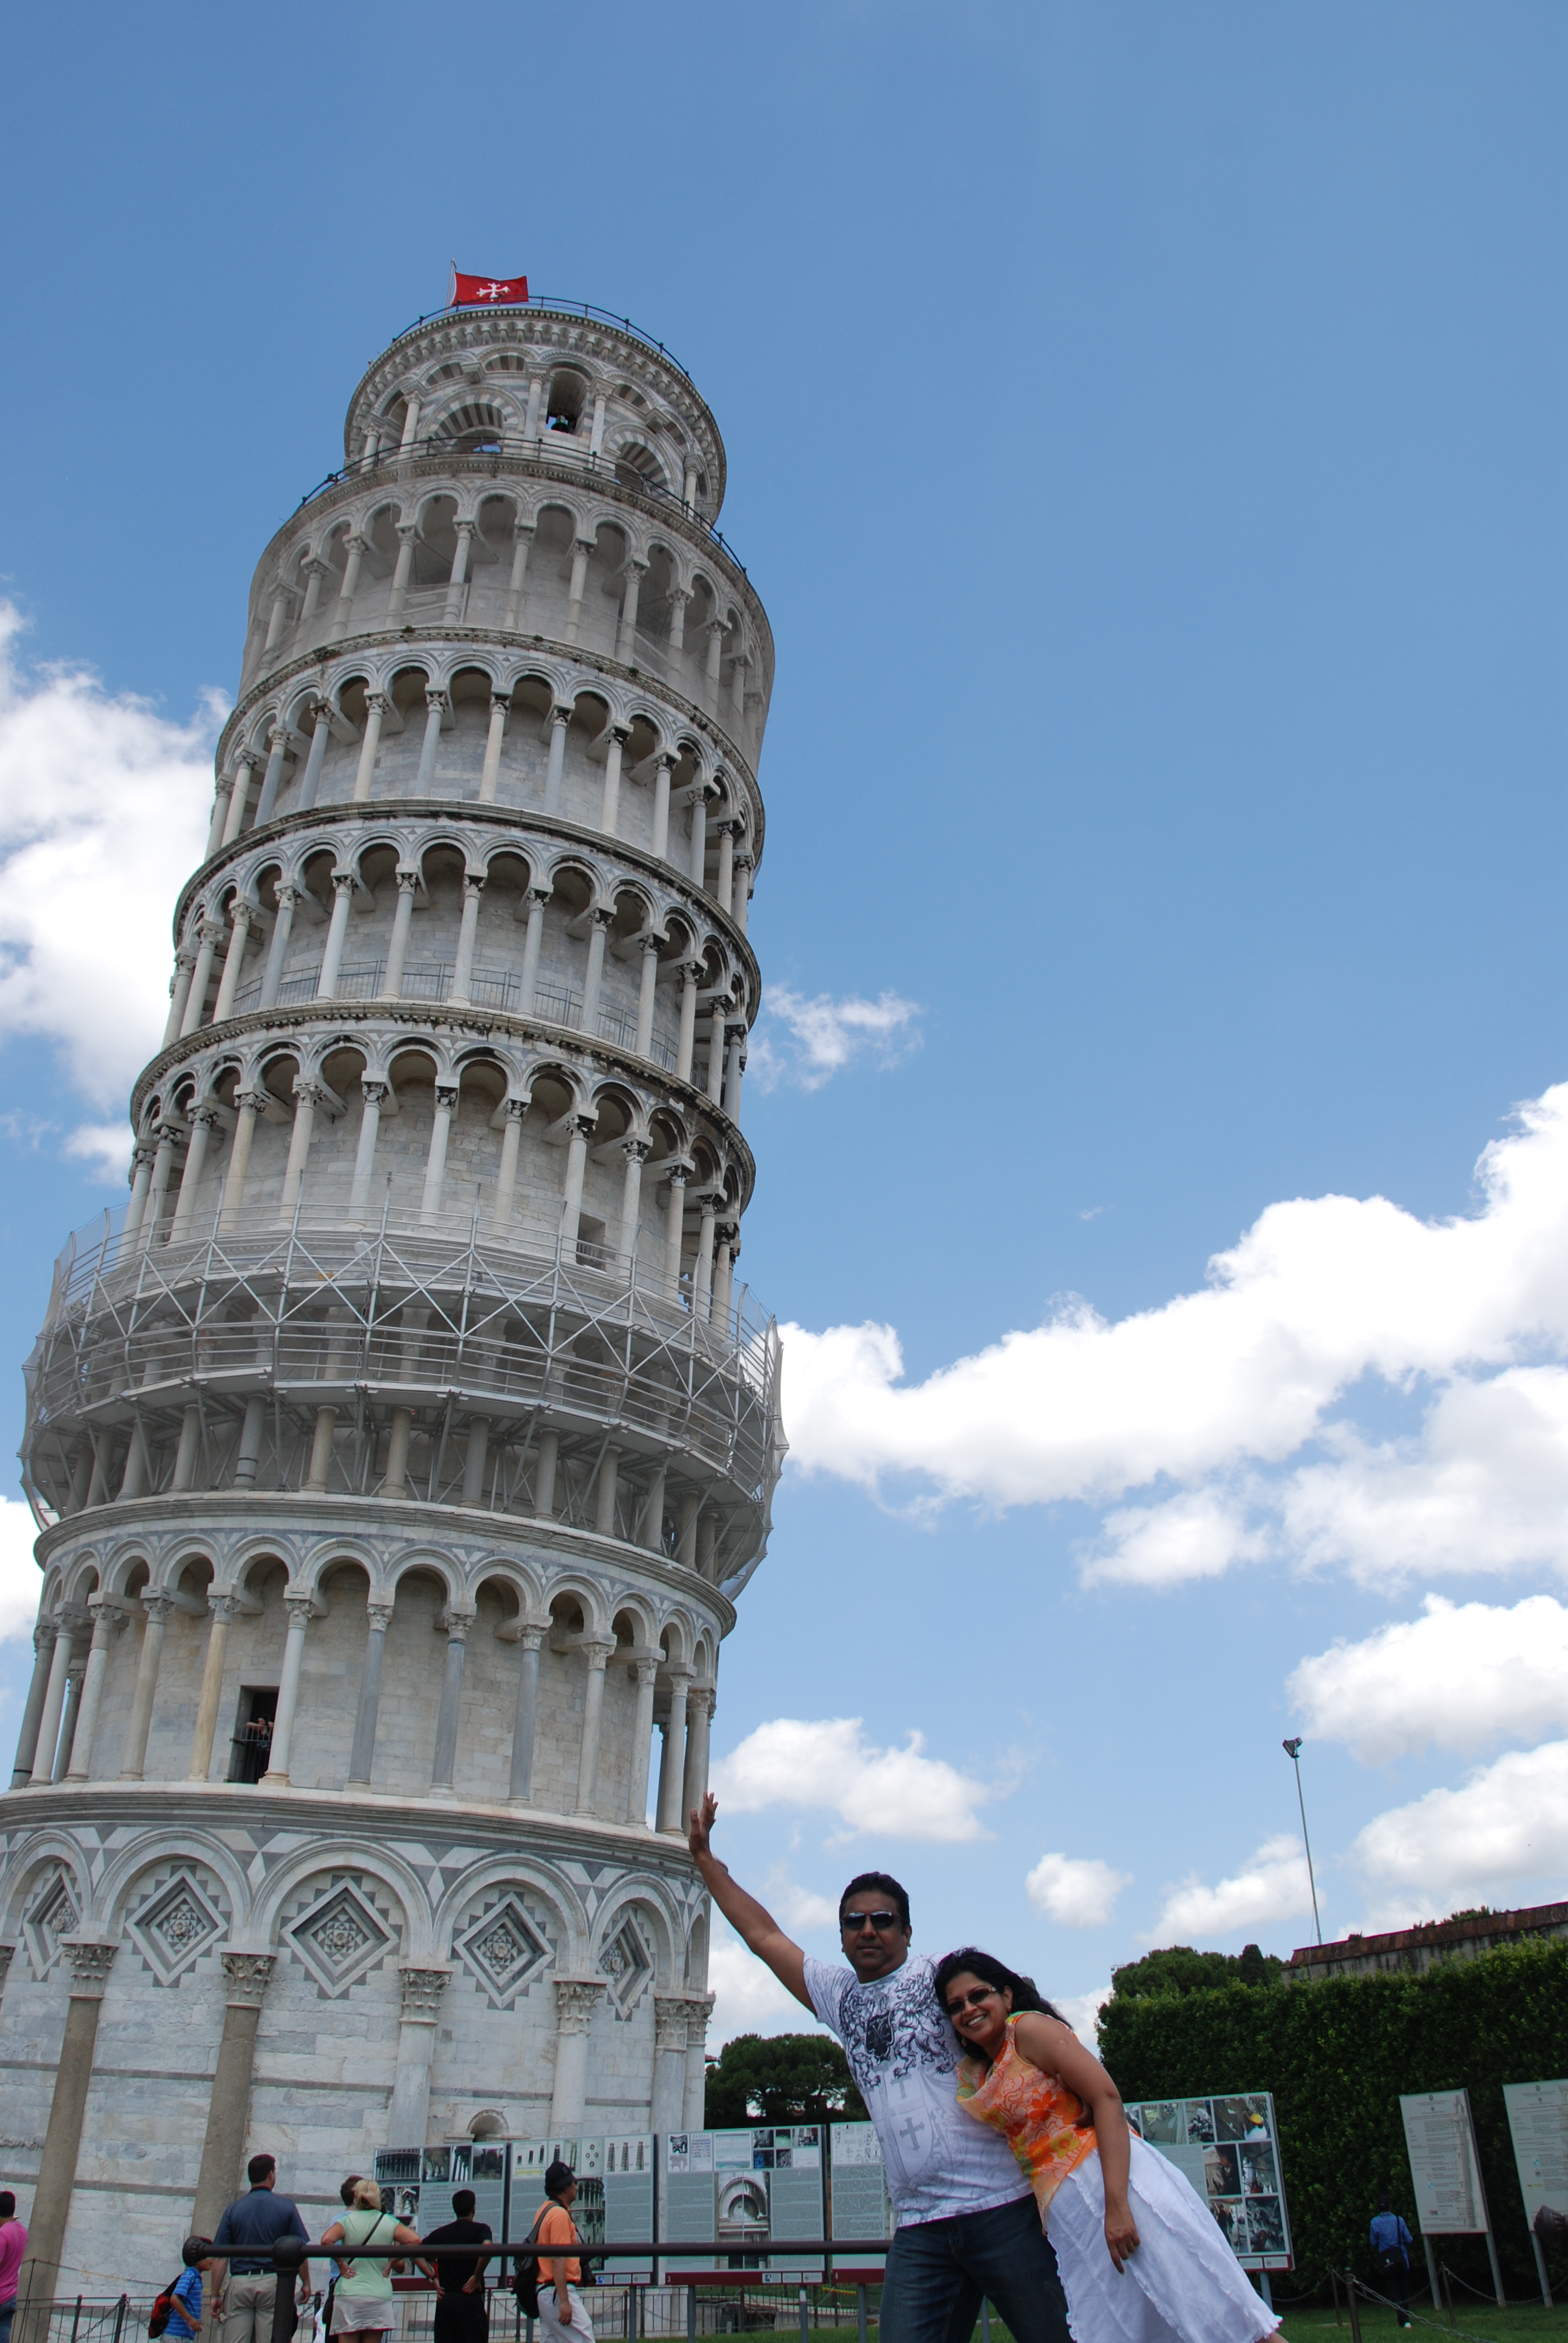 Day trip to Pisa